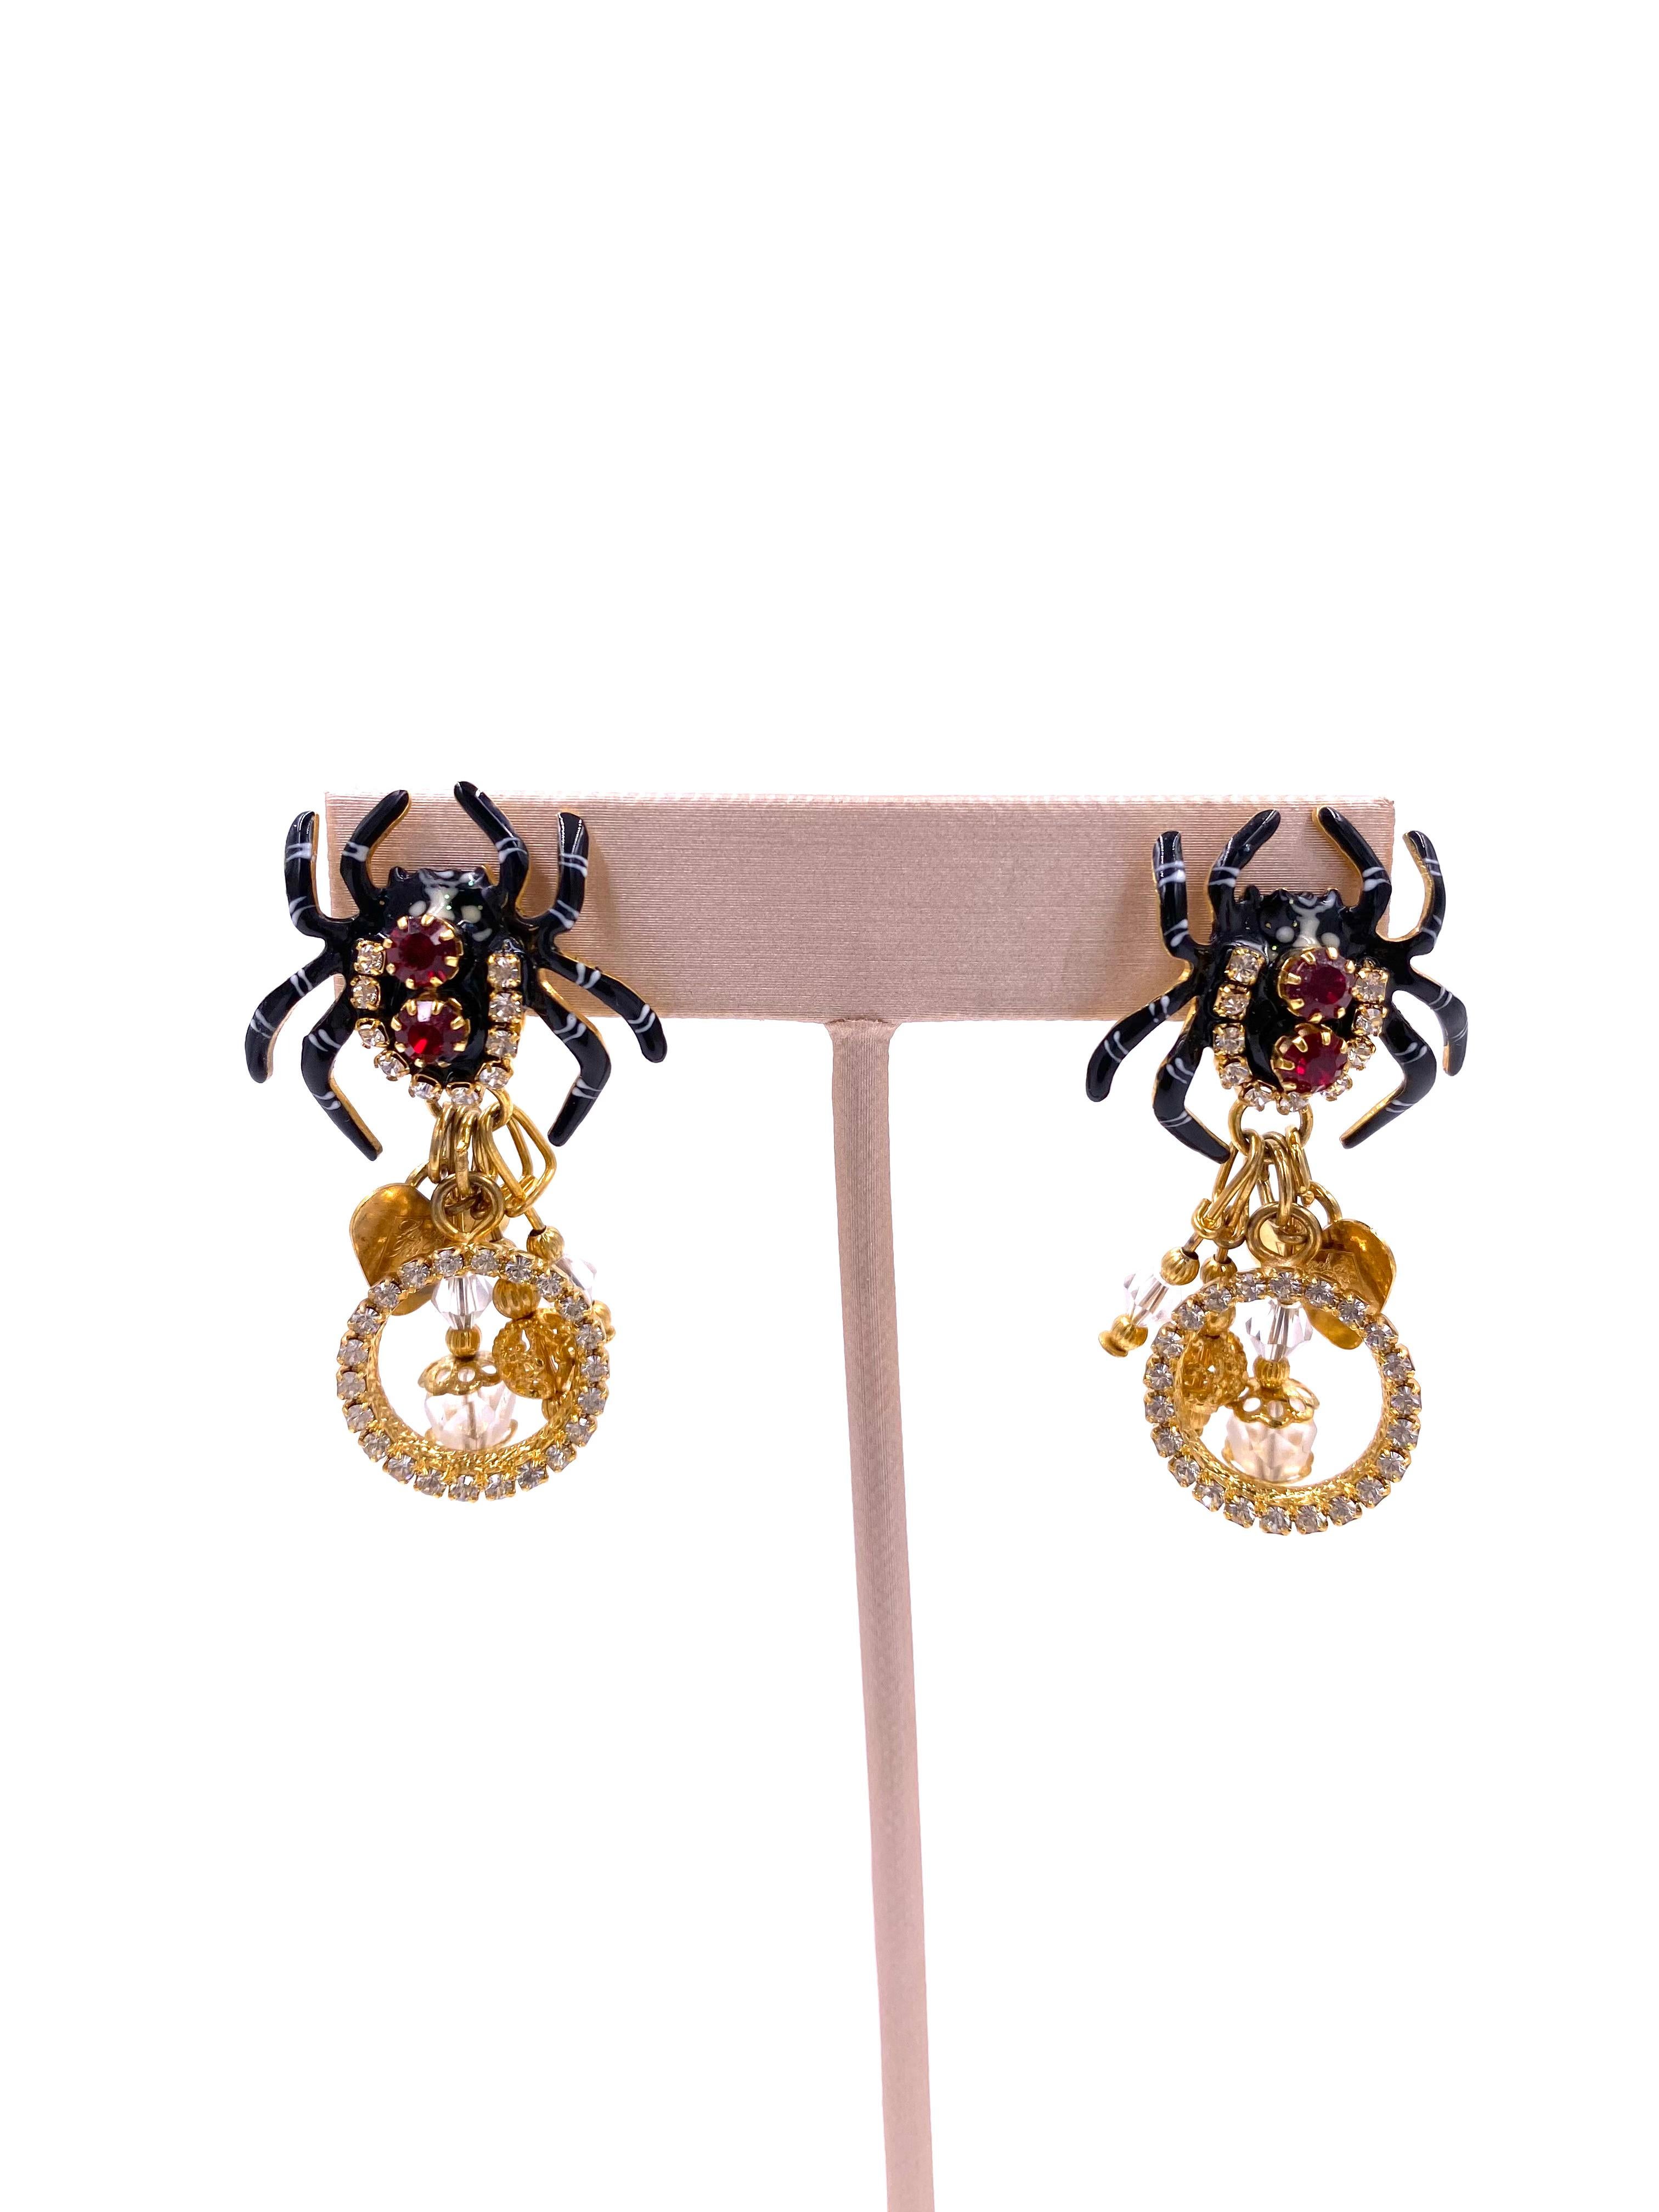 Indulge in luxury with Lunch at the Ritz Spider Spumoni earrings. The black spider design, adorned with gold and red rhinestone details, exudes sophistication and exclusivity. Elevate your style and make a statement with these elegant